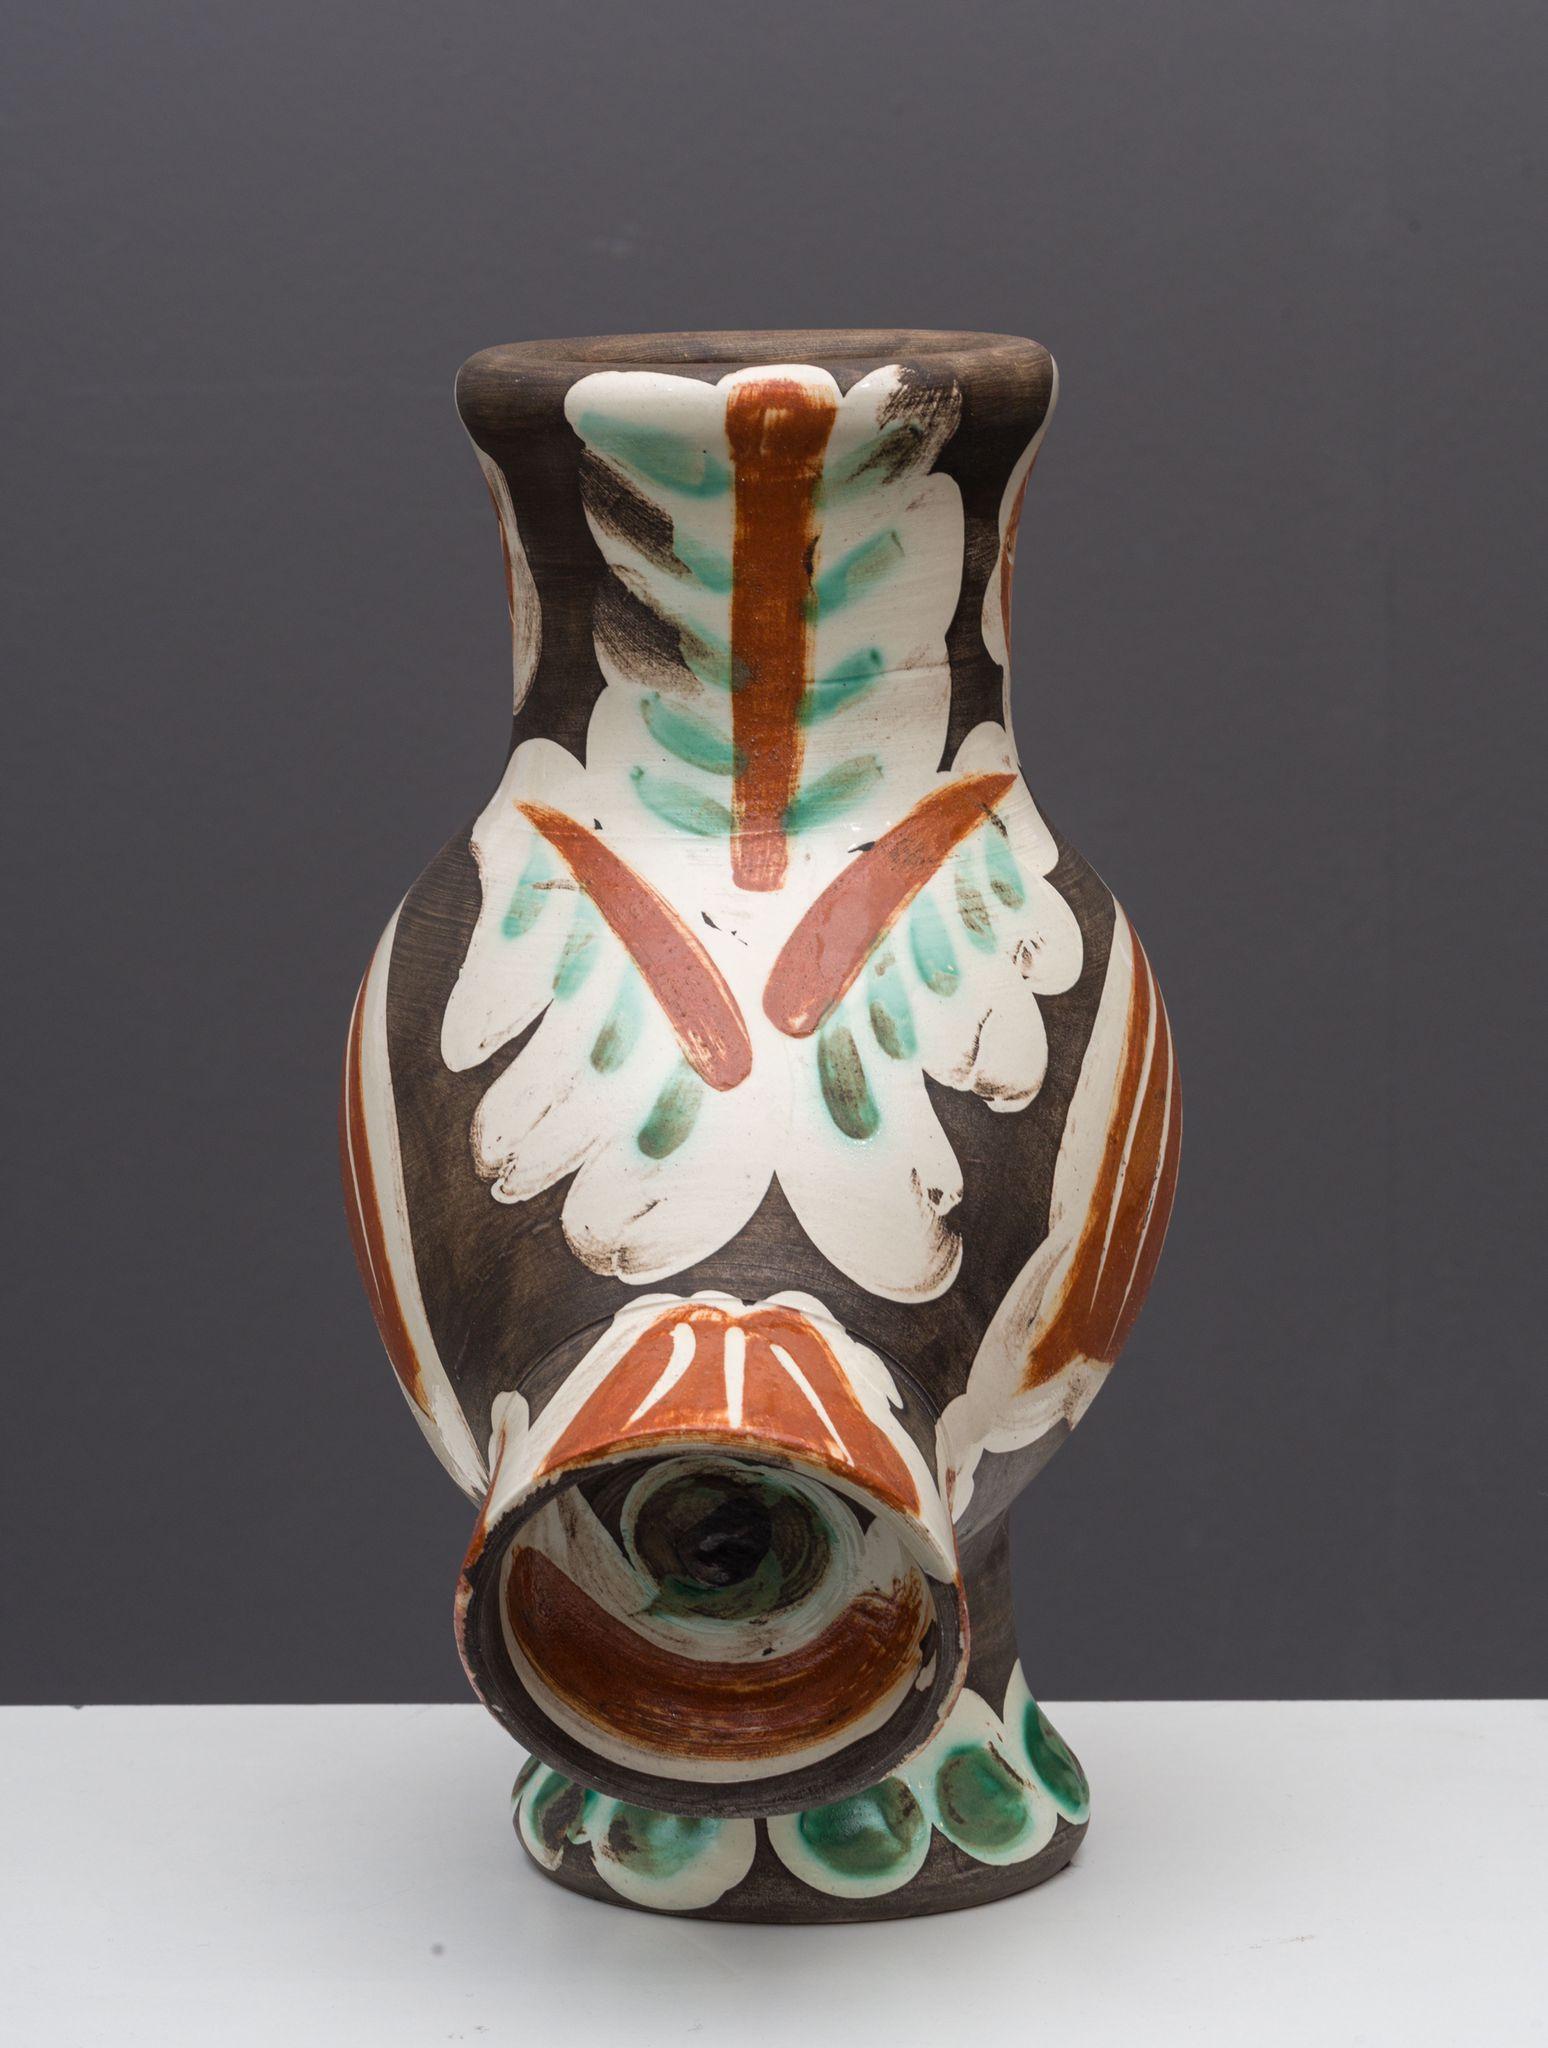 Chouette, Owl, Picasso, 1960's, earthenware, pitcher, edition, design, abstract - Sculpture by Pablo Picasso